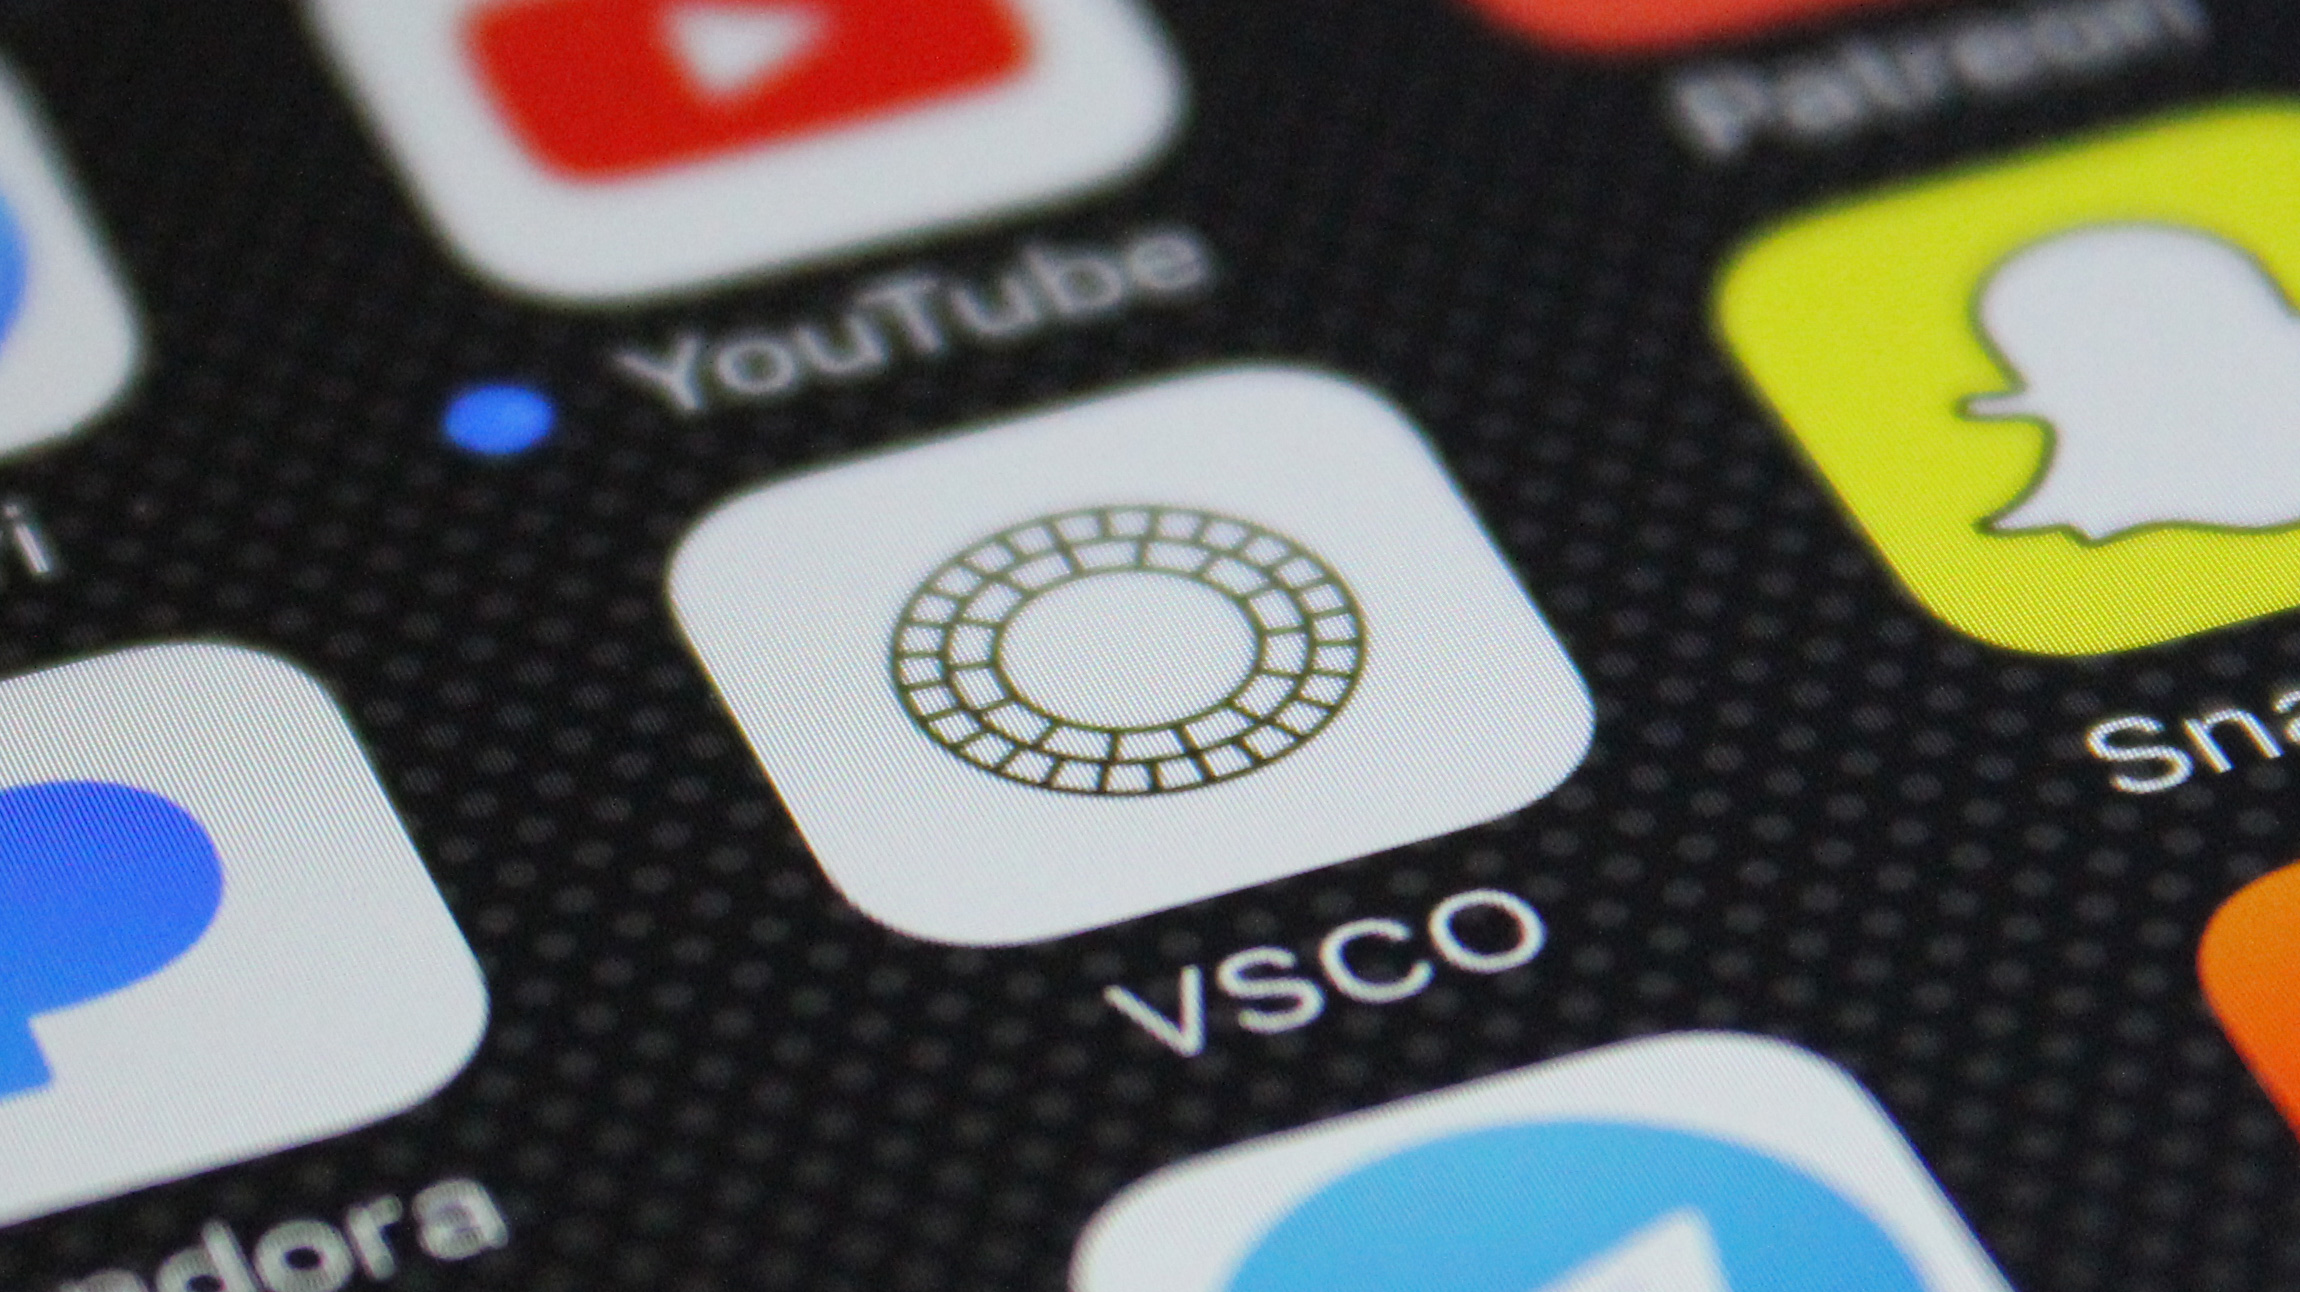 Vsco Sues Picsart Over Photo Filters That Were Allegedly Reverse